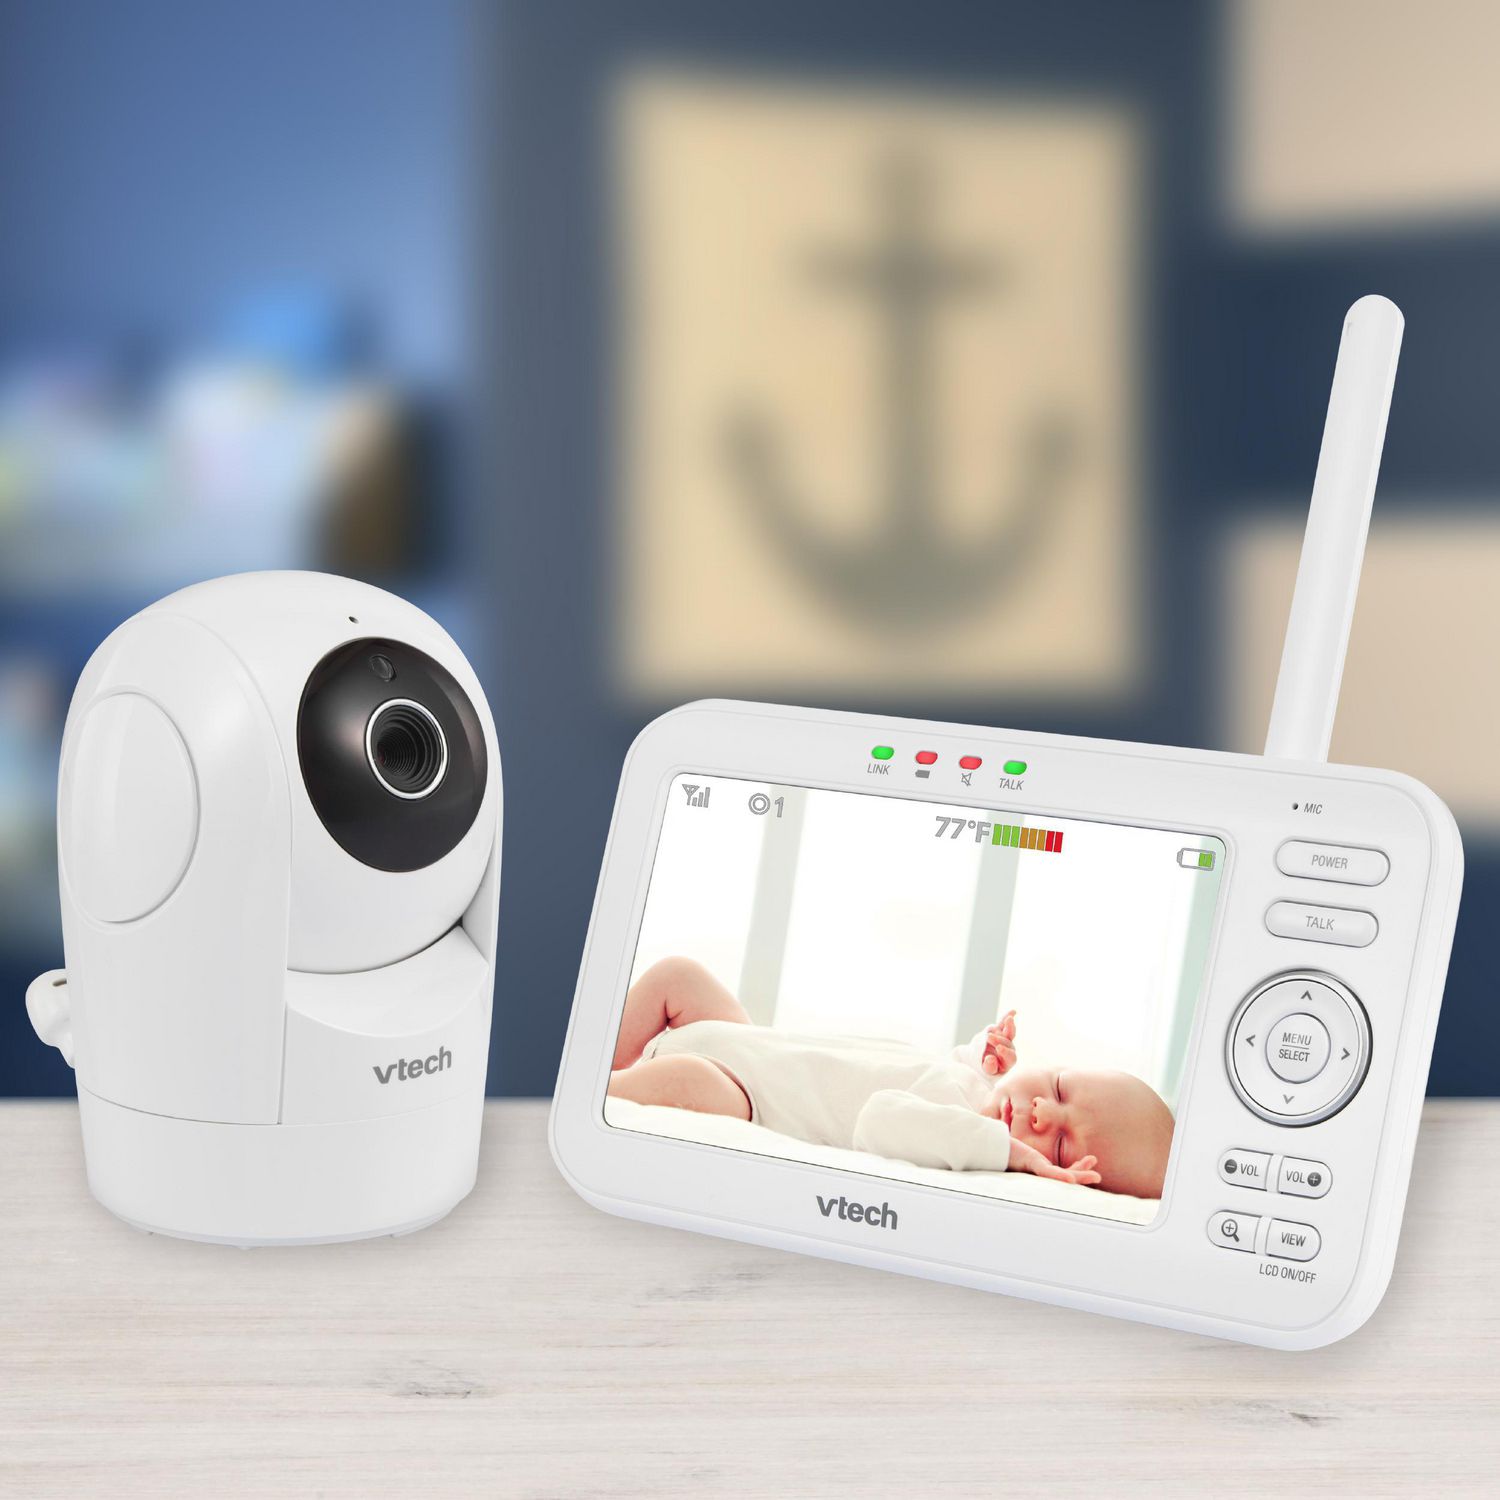 Vtech Vm5262 5 Digital Video Baby Monitor With Pan Tilt Camera Full Color And Automatic Night Vision White Walmart Canada